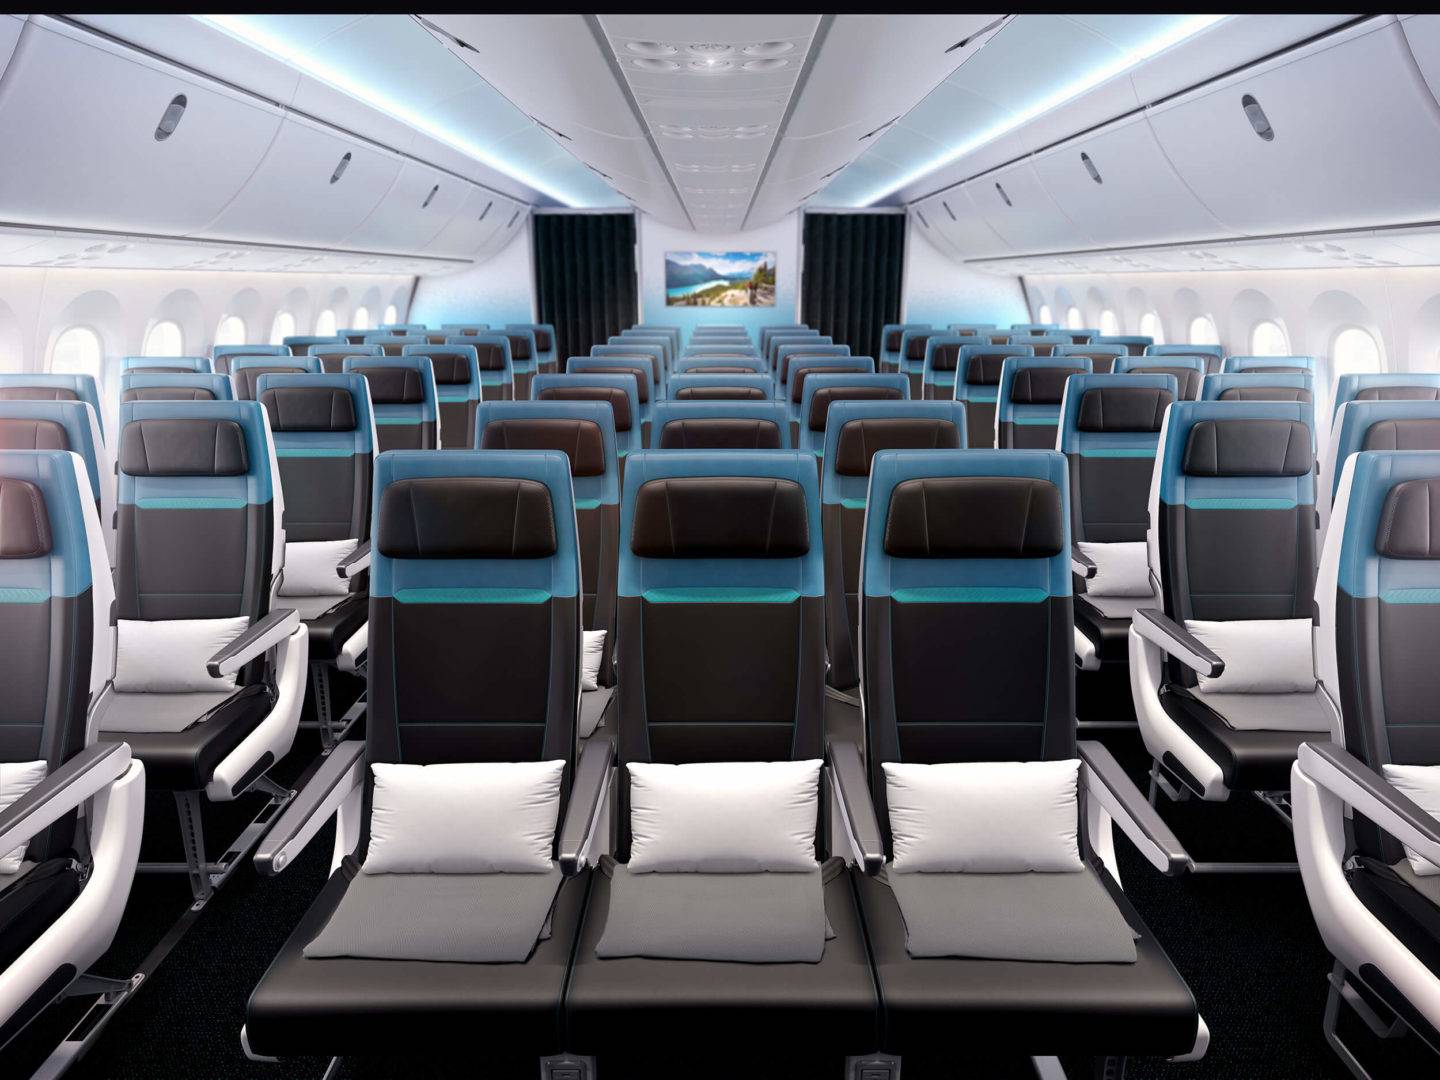 Full cabin view of the Economy Class cabin onboard WestJet's B787 aircraft